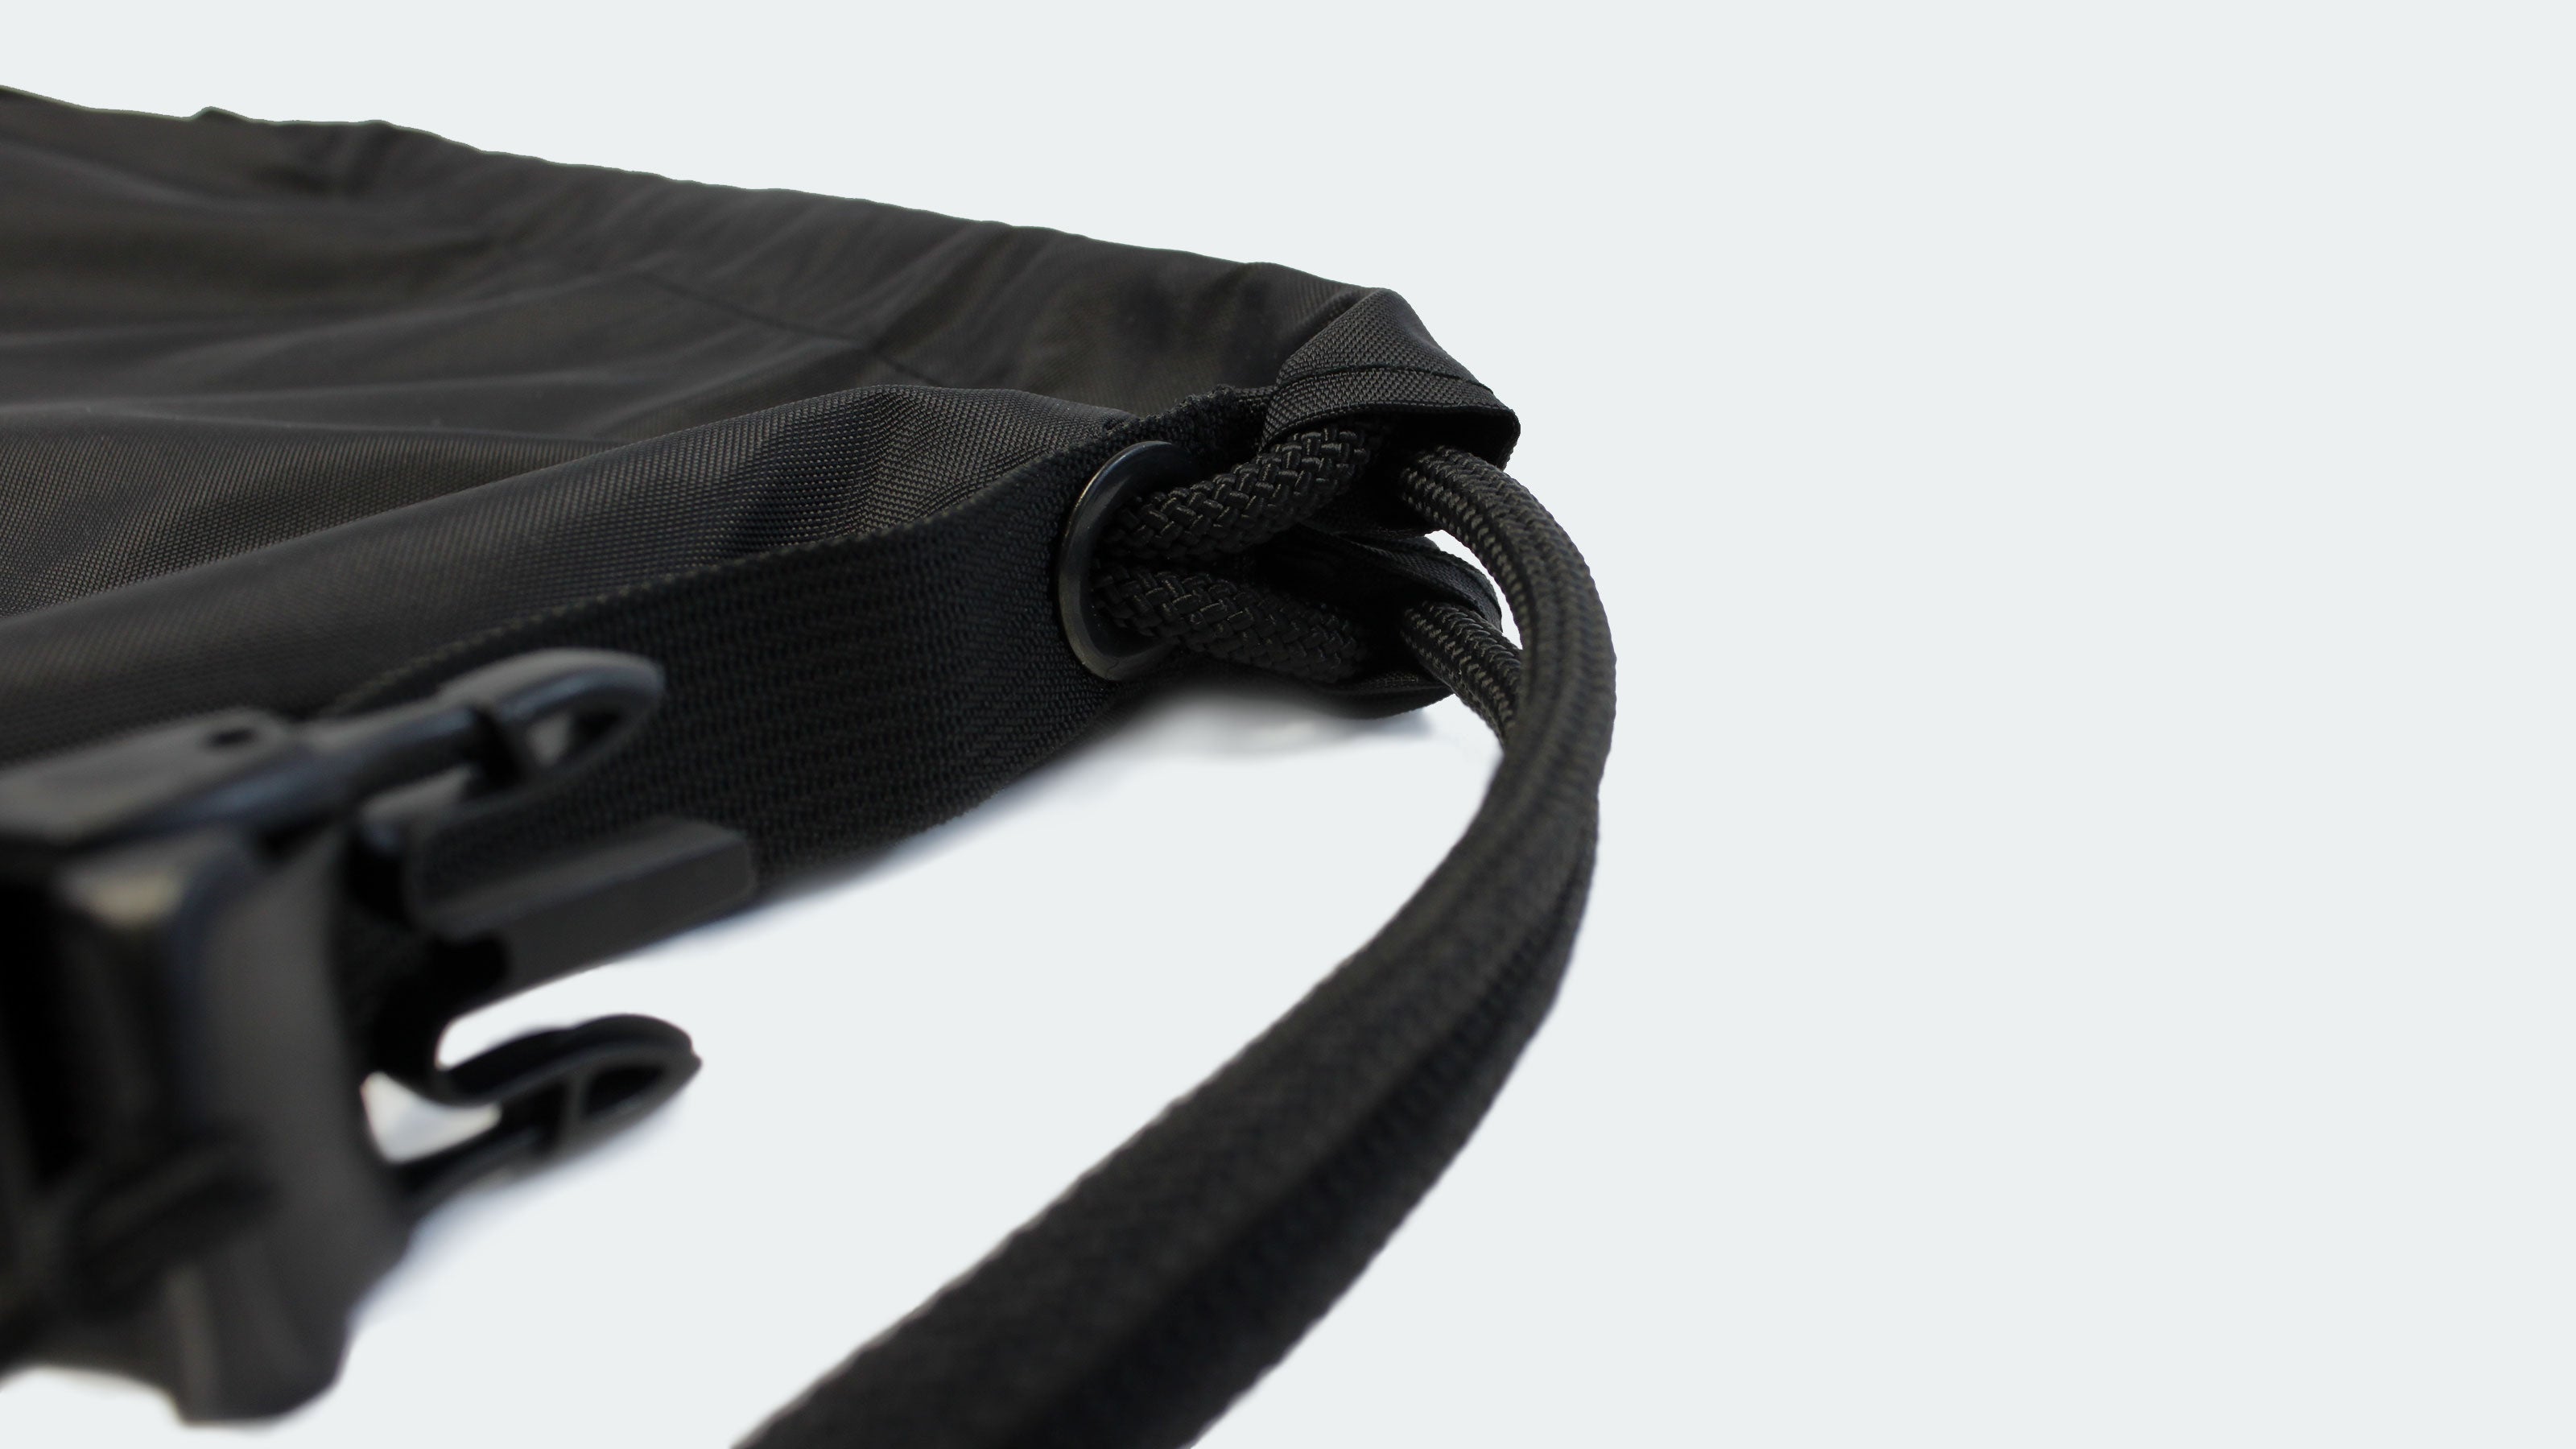 EXCLUSIVE FEATURES - Channel-Anchored Drawstrings™